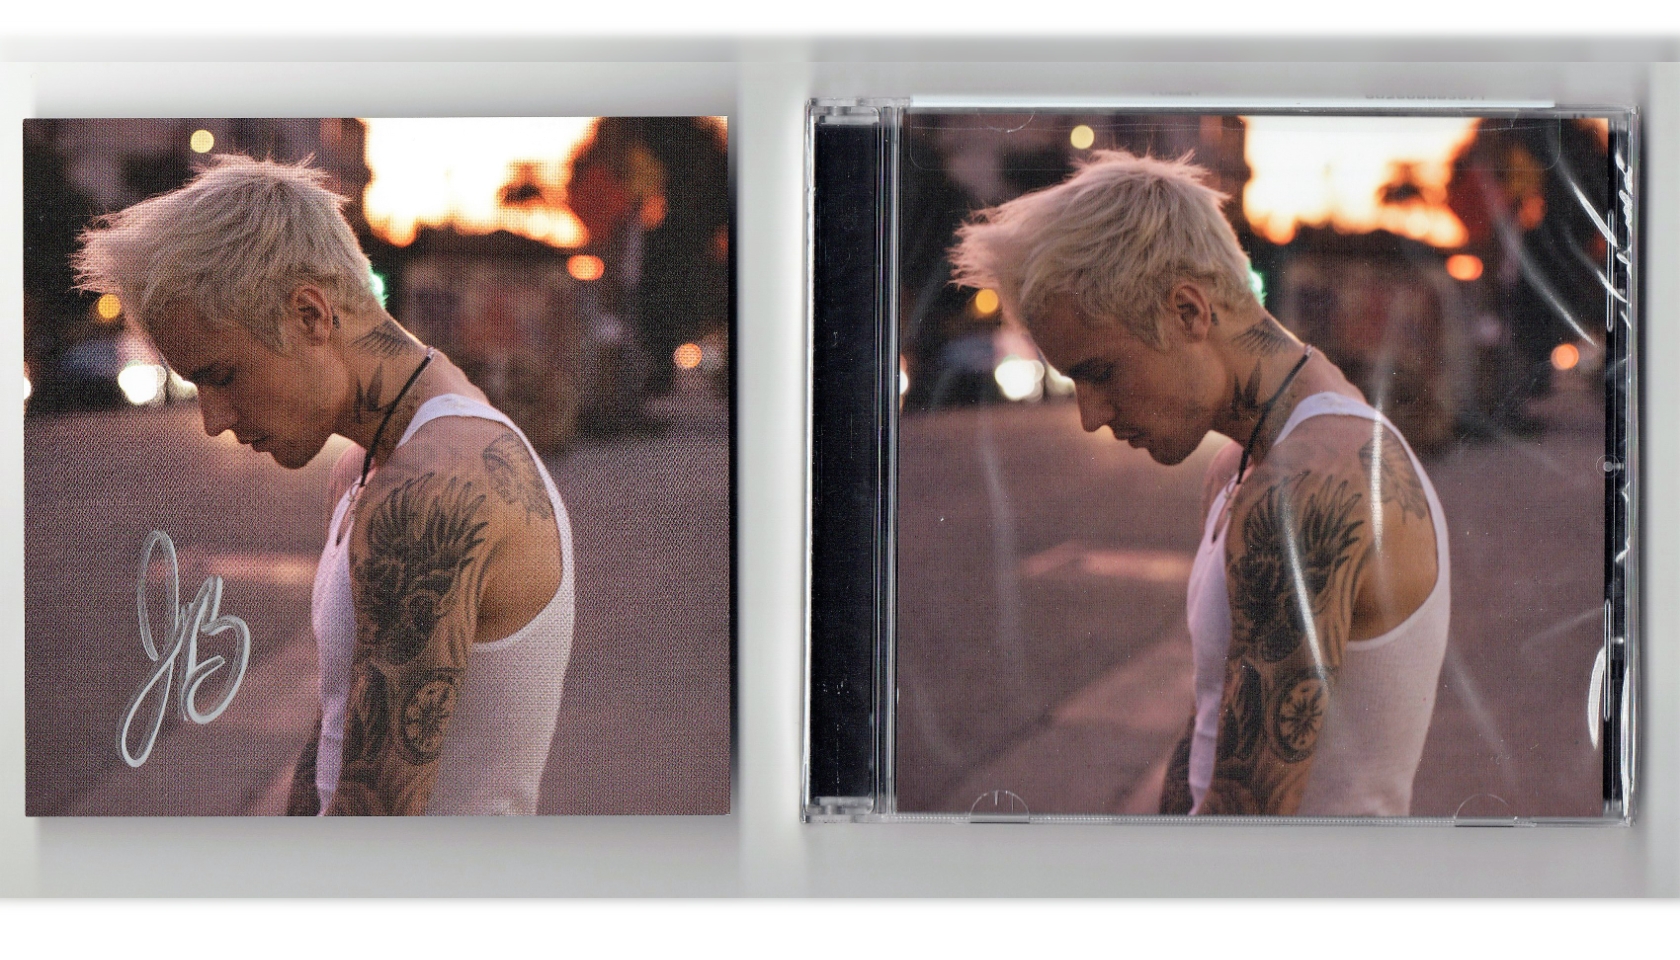 'Yummy' CD Signed by Justin Bieber - CharityStars